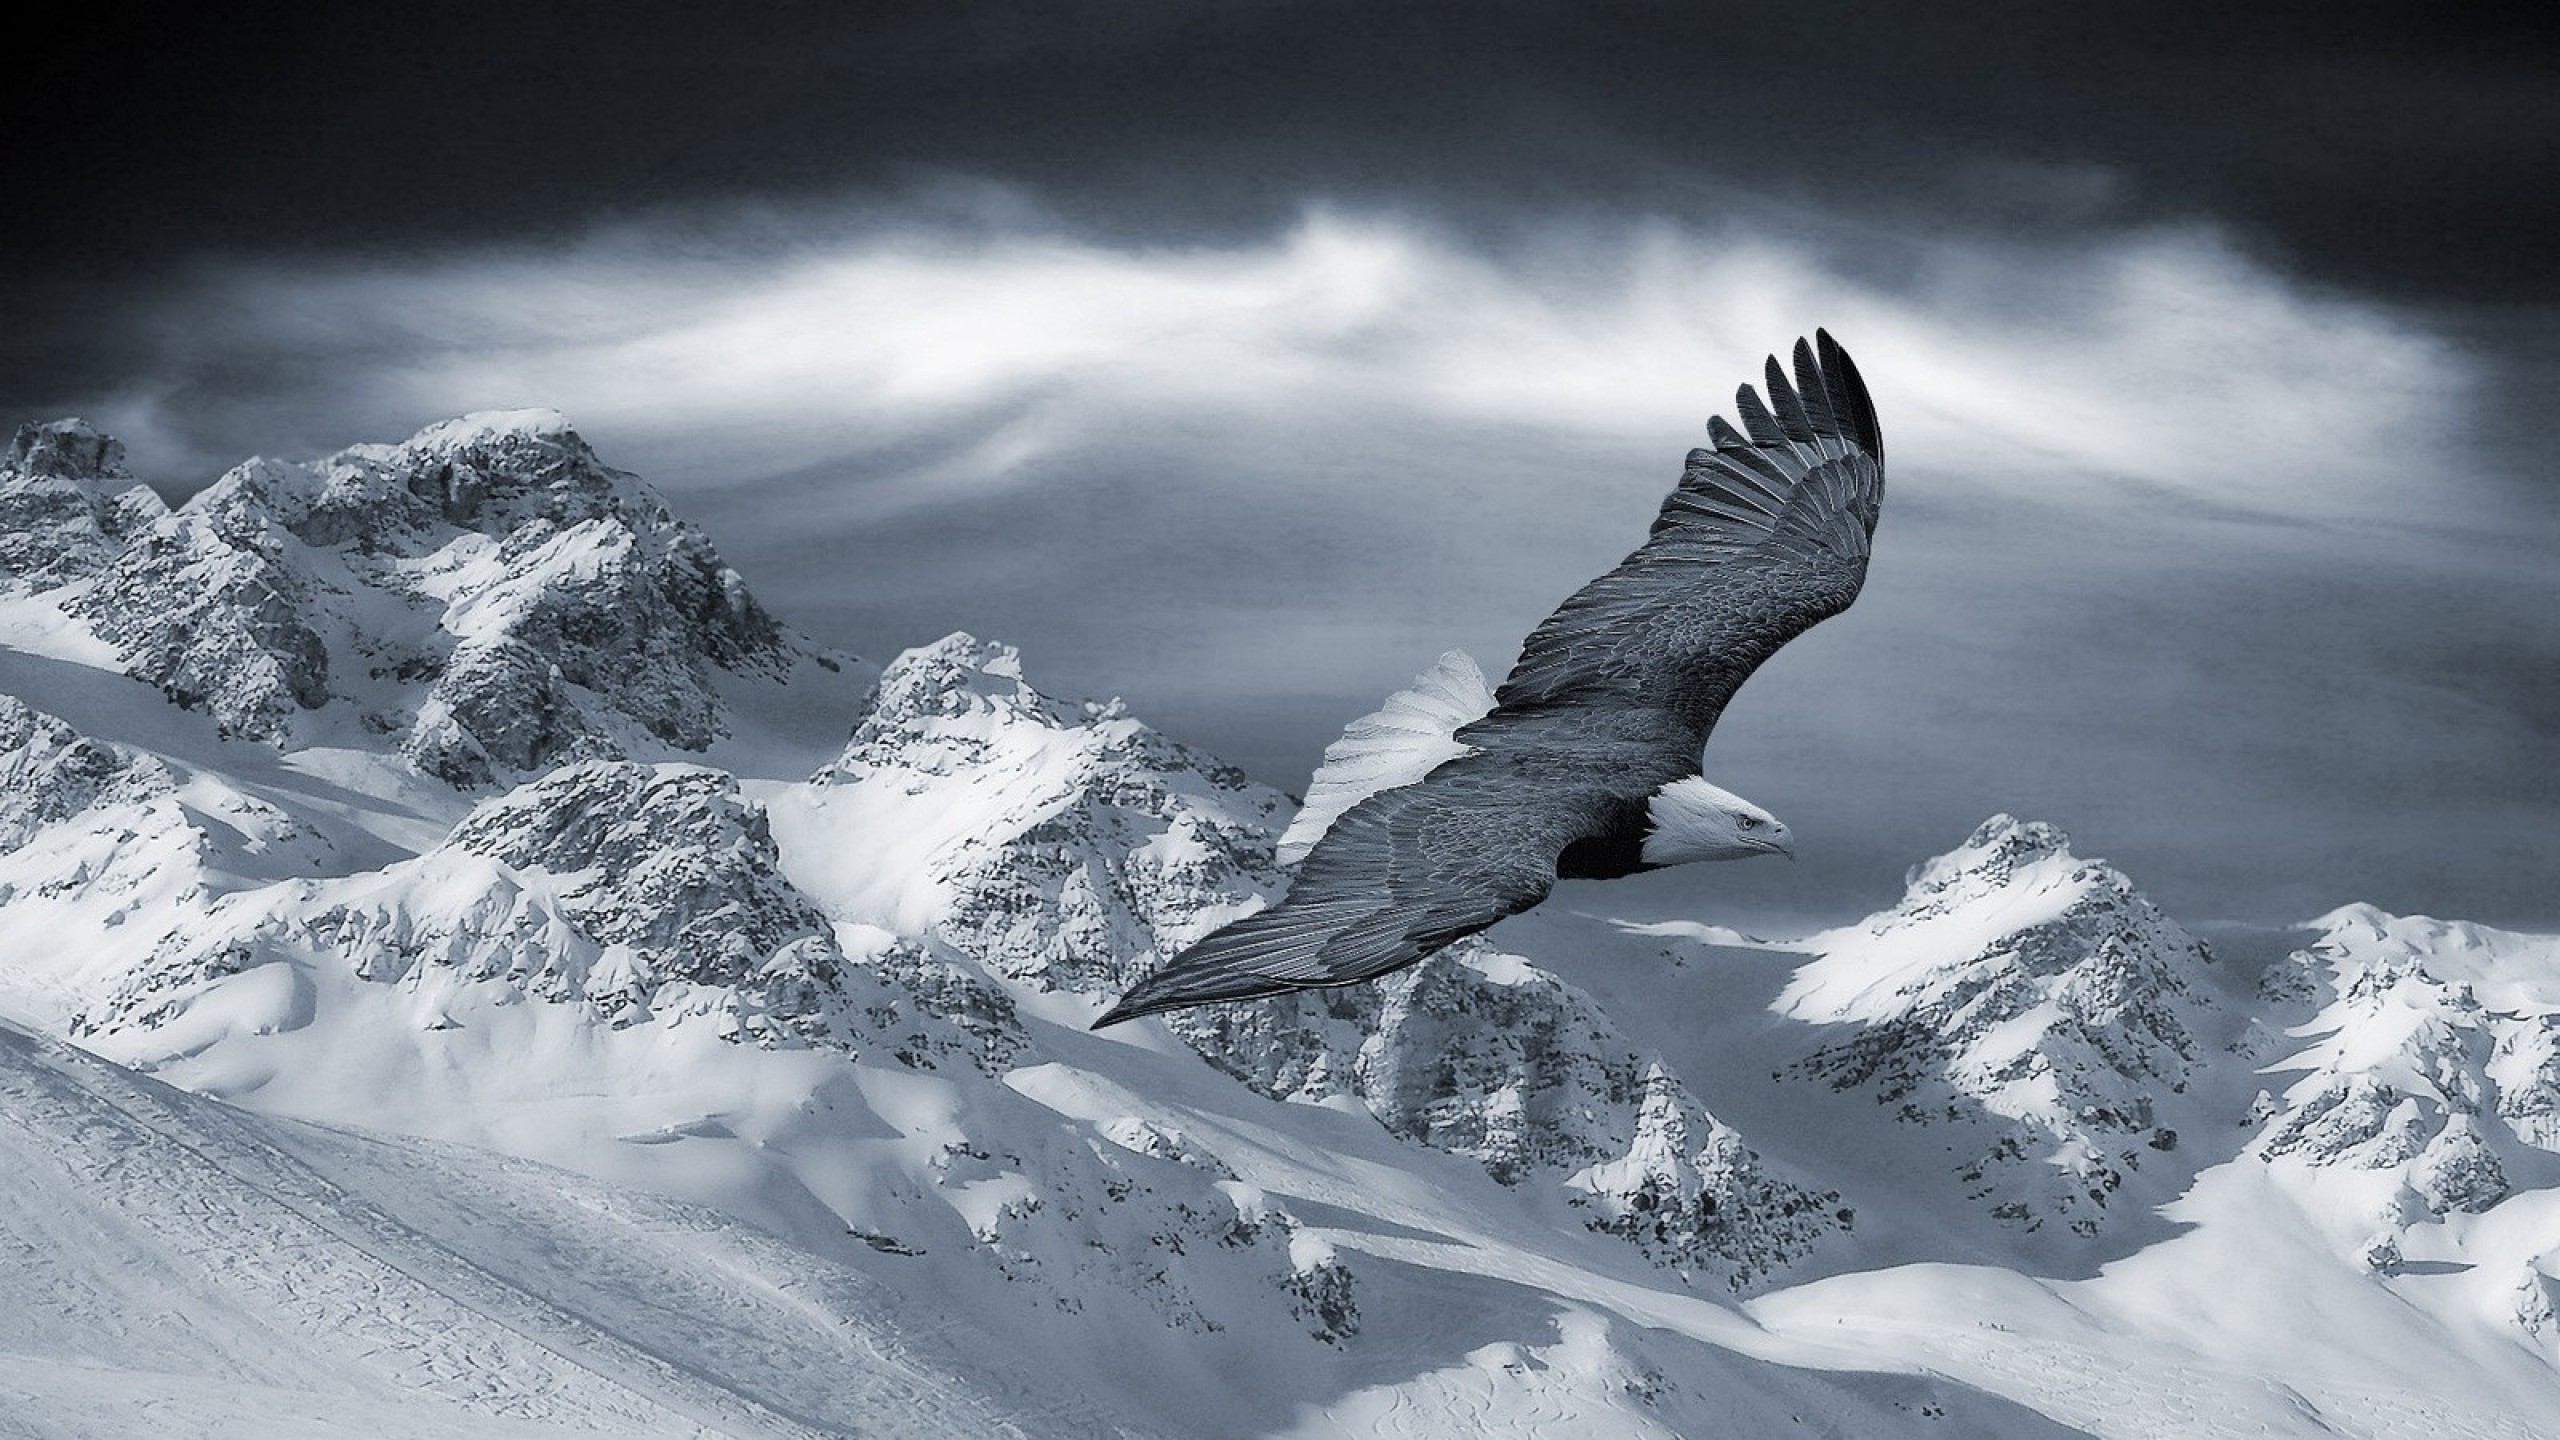 General 2560x1440 eagle mountains snow animals nature birds wings flying